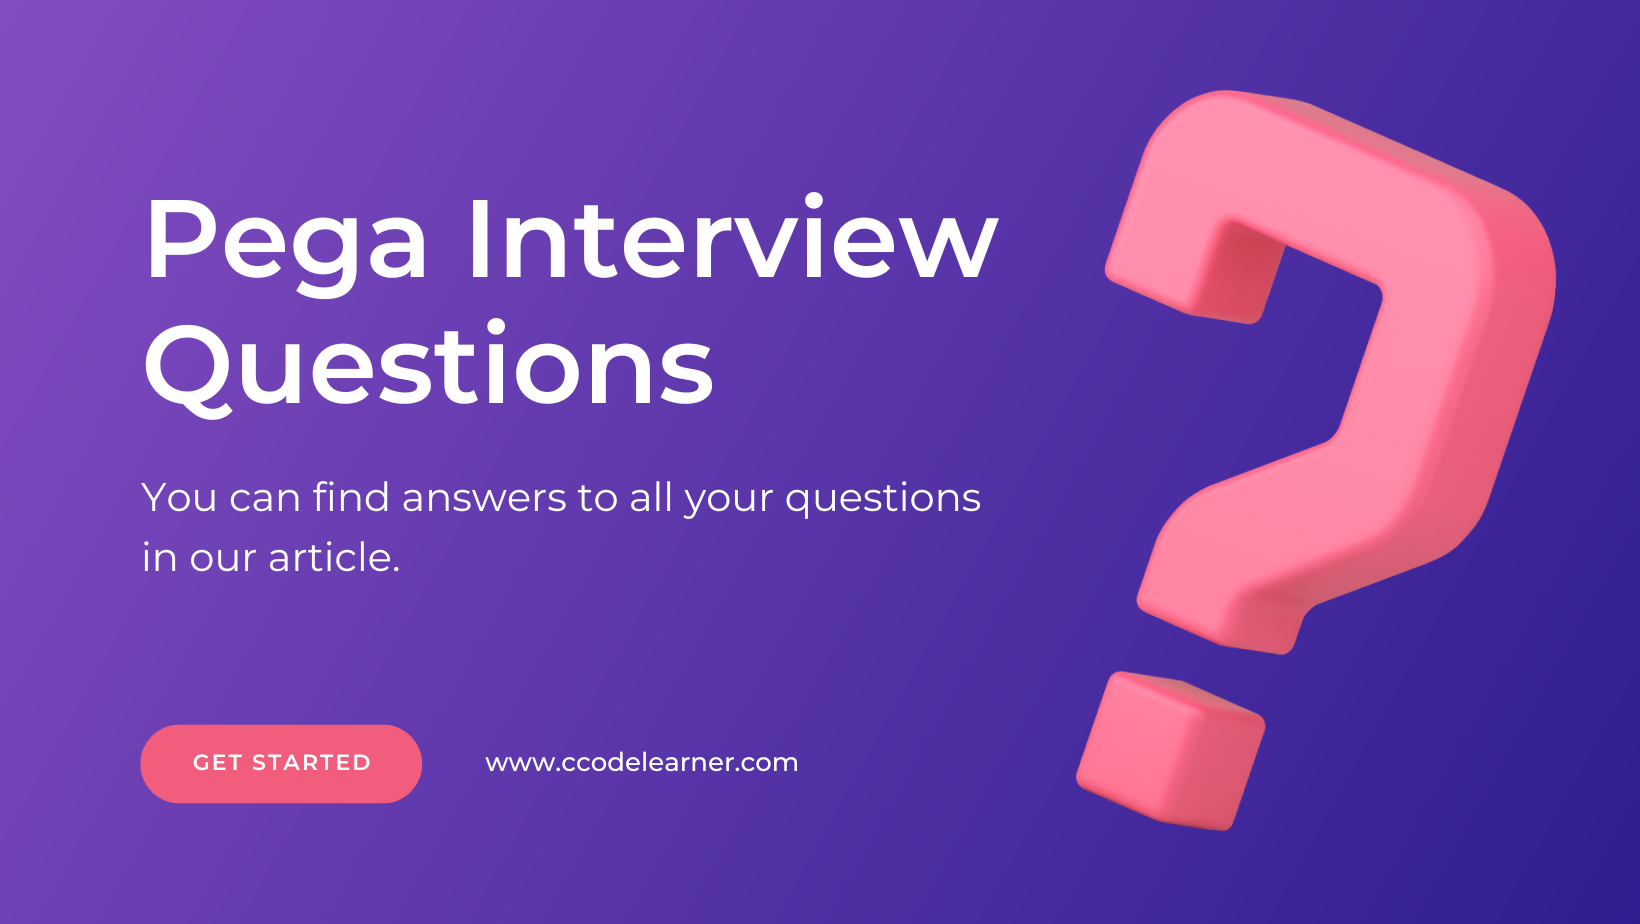 Pega Interview Questions and answers